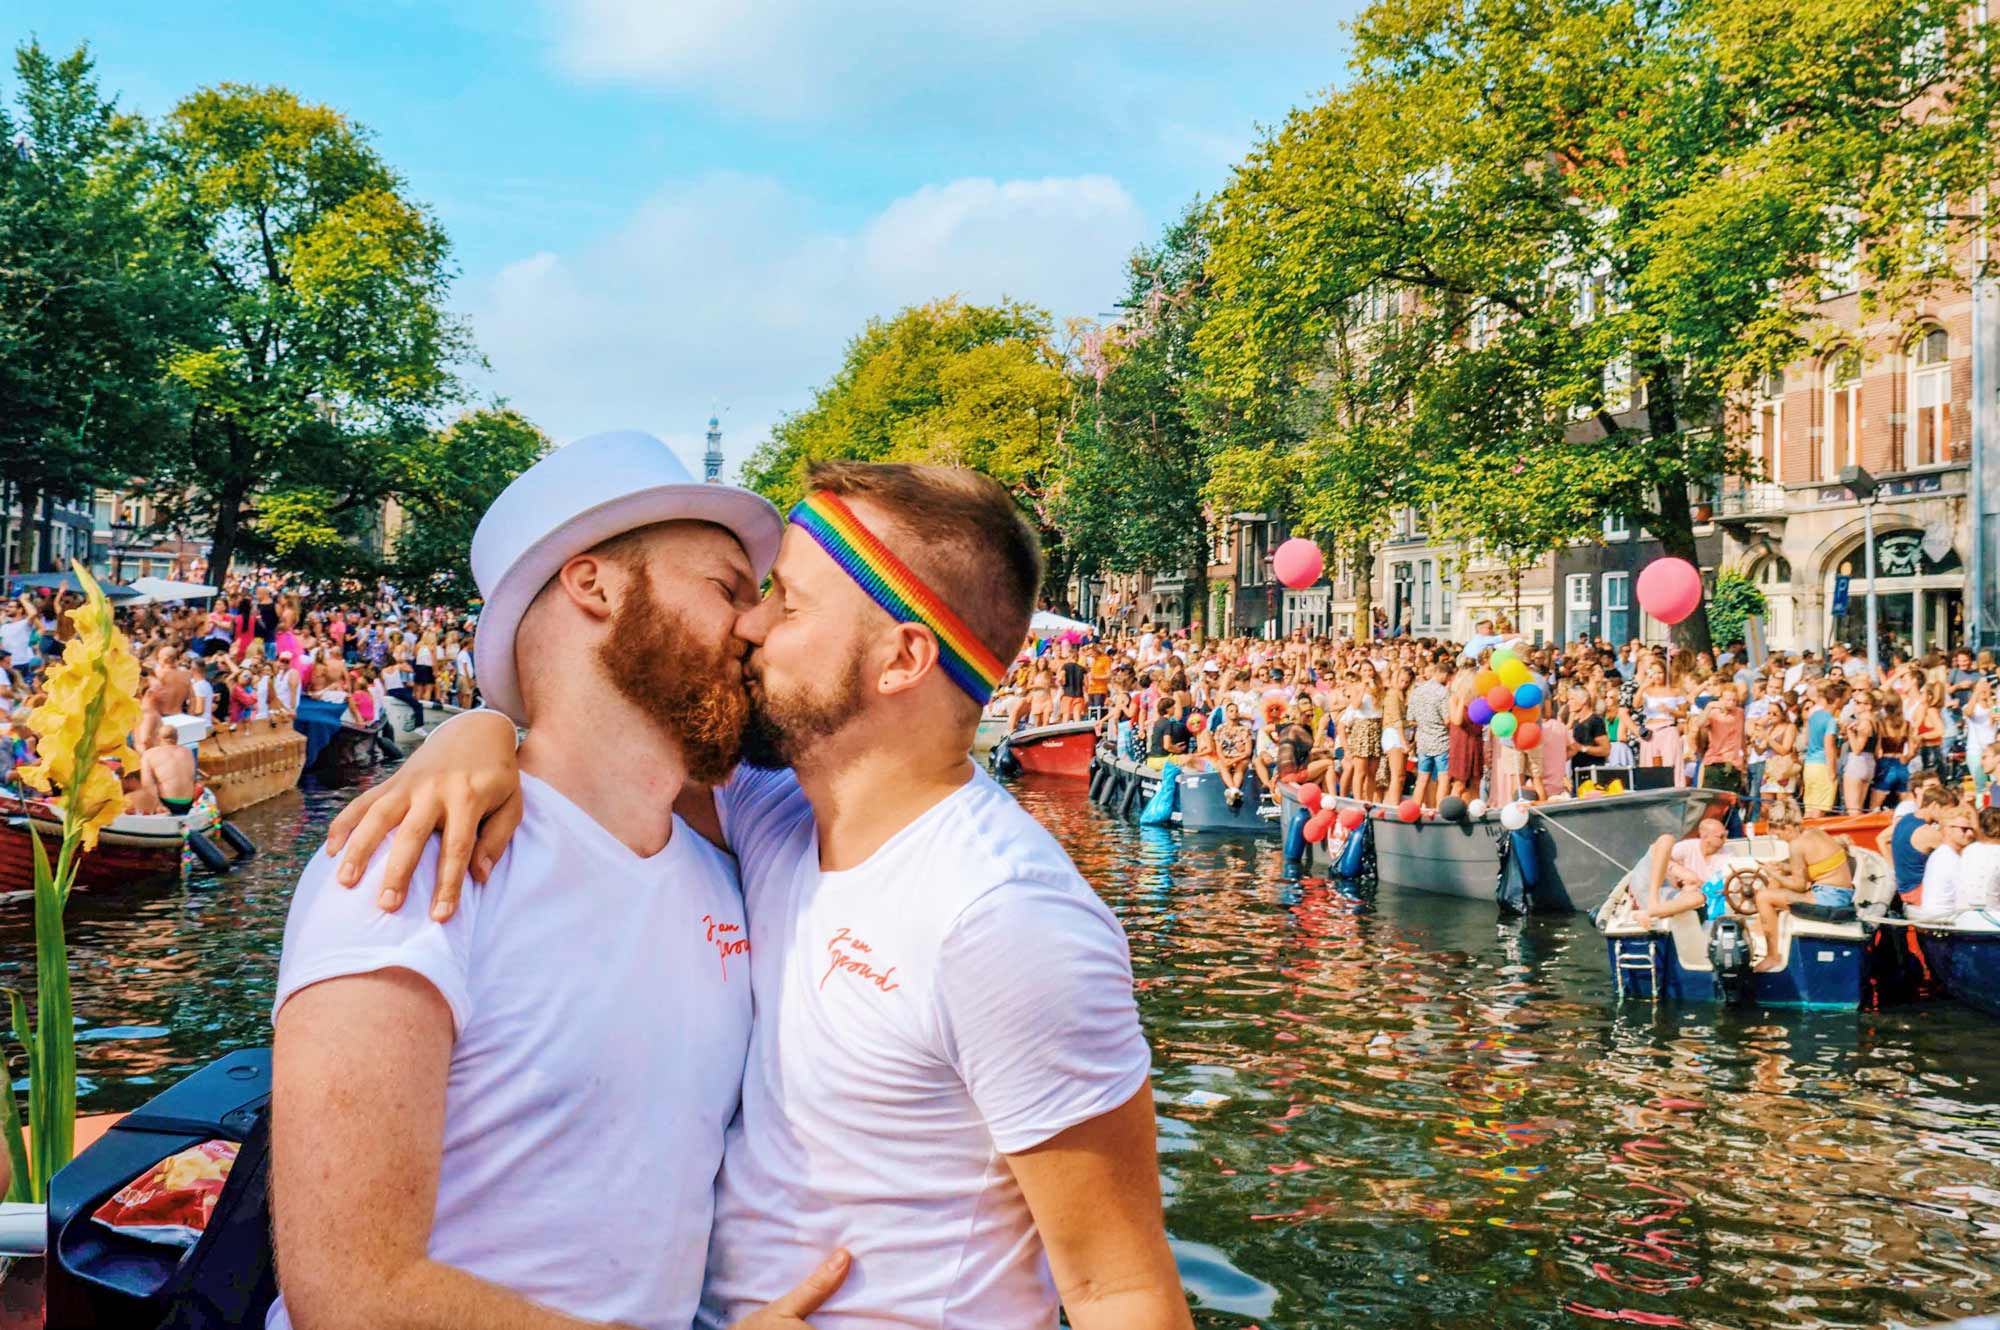 Exciting! Amsterdam to host World Pride 2026 with the Motto “UNITY”